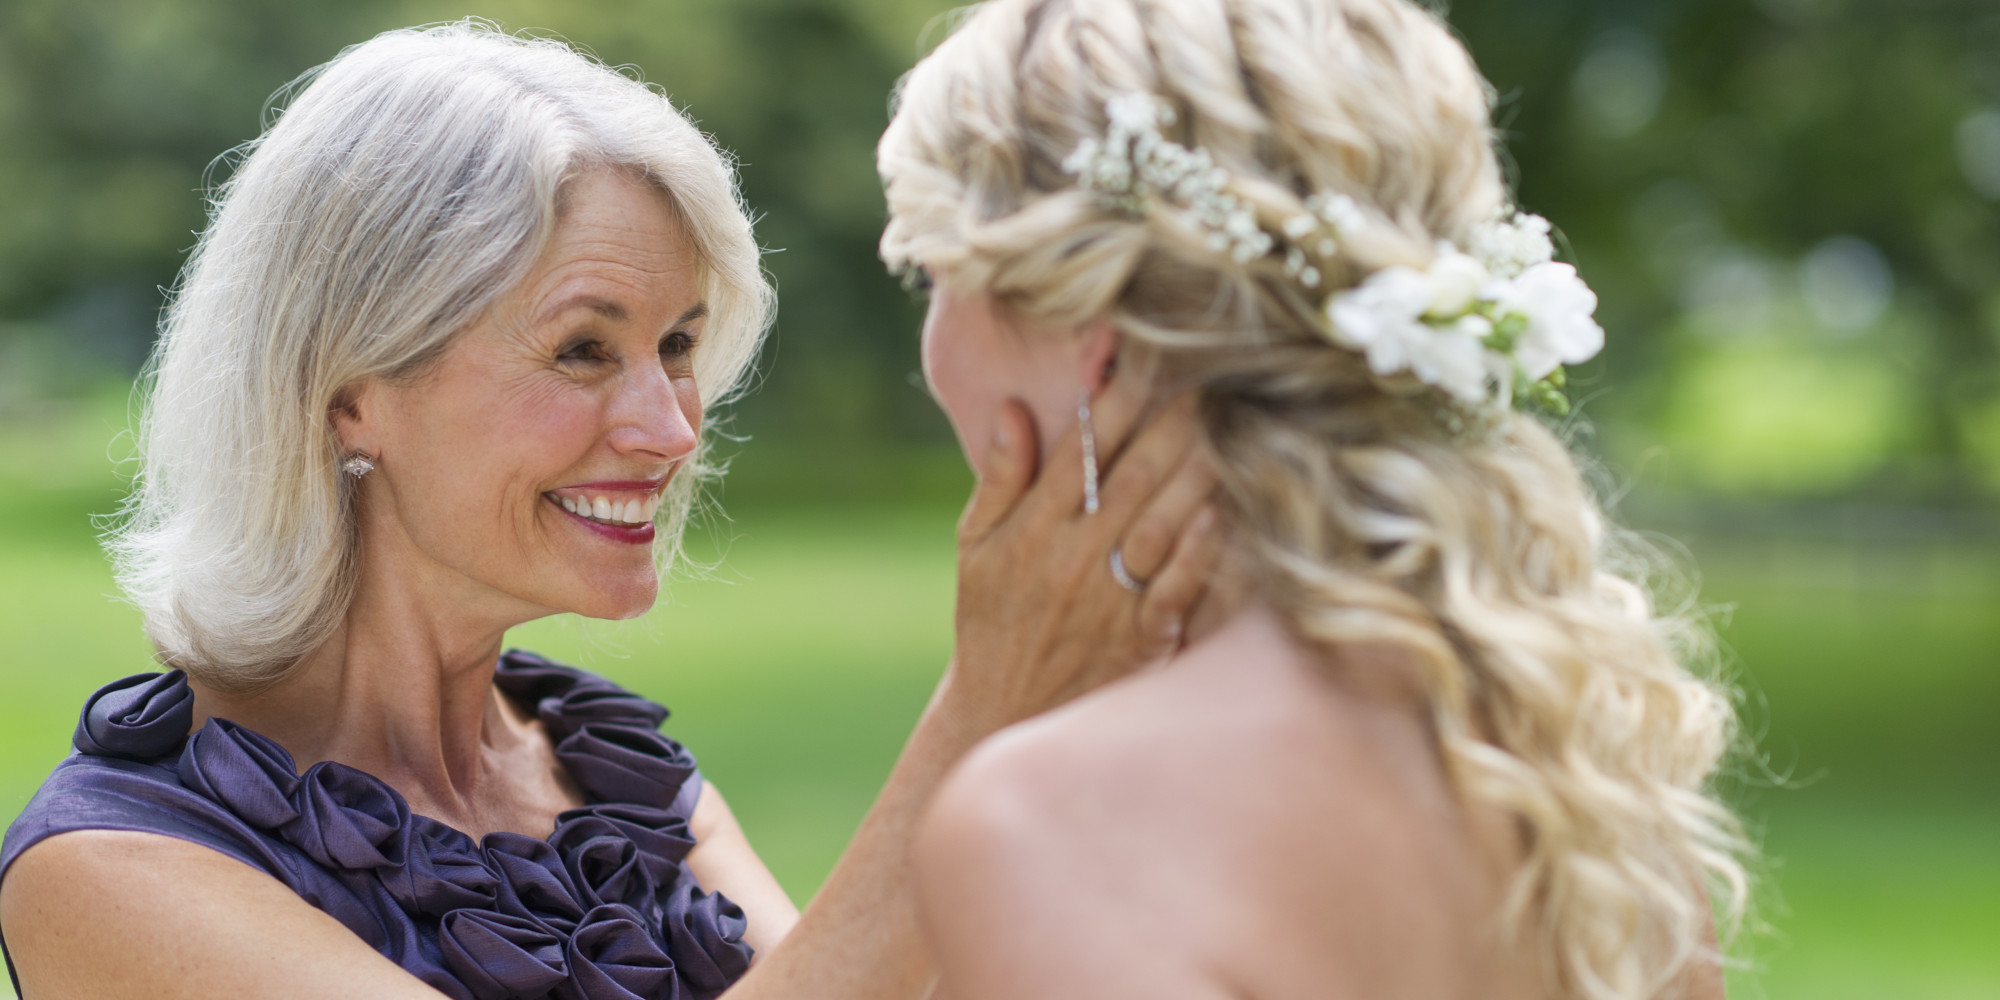 Picking Out Your Moms Dress For The Wedding More Drama Huffpost 